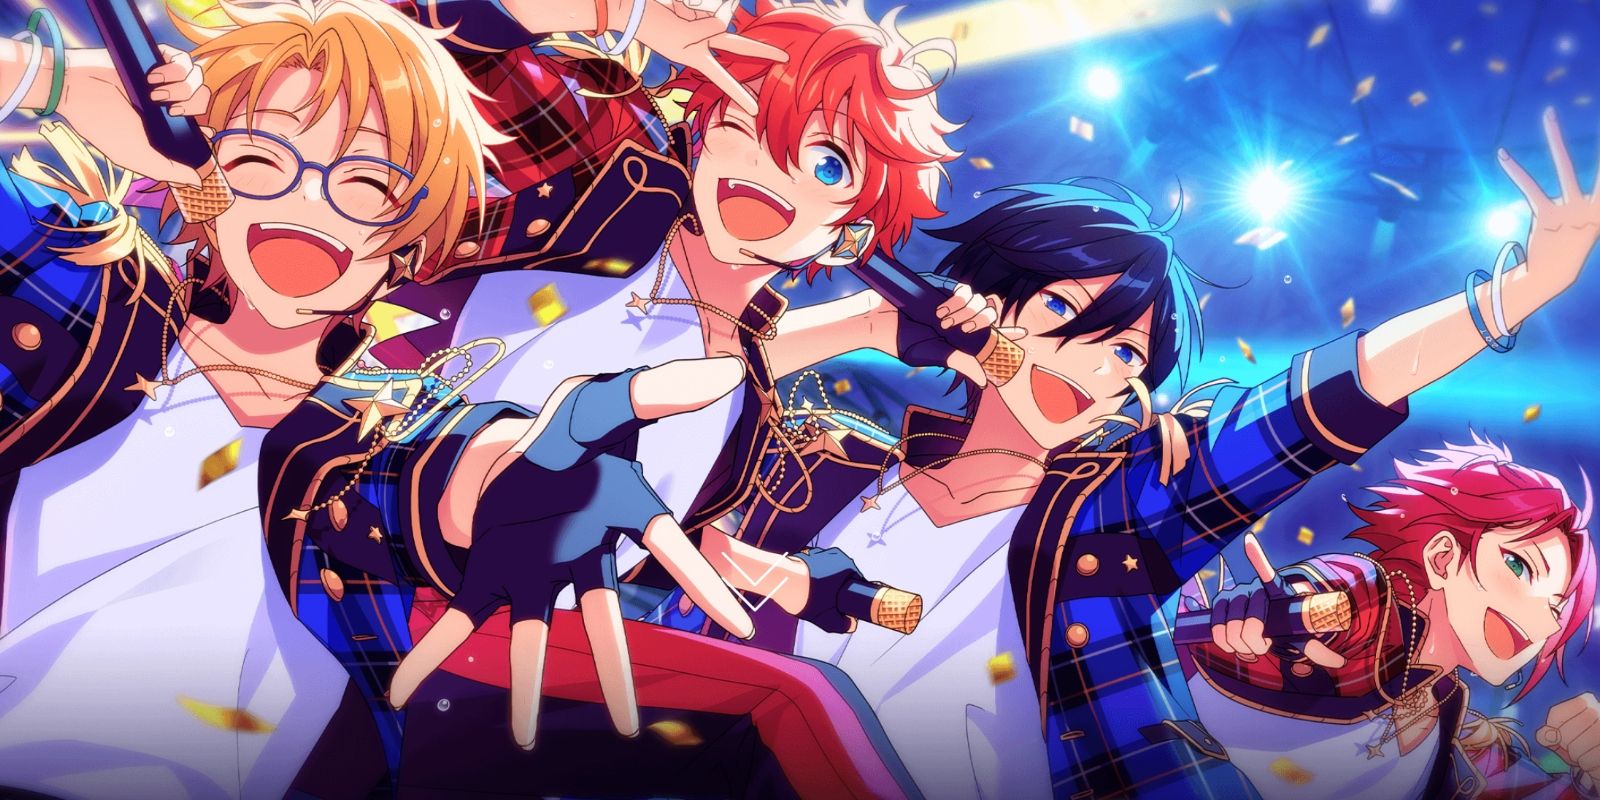 What to Know About Ensemble Stars!! Before Its English Release